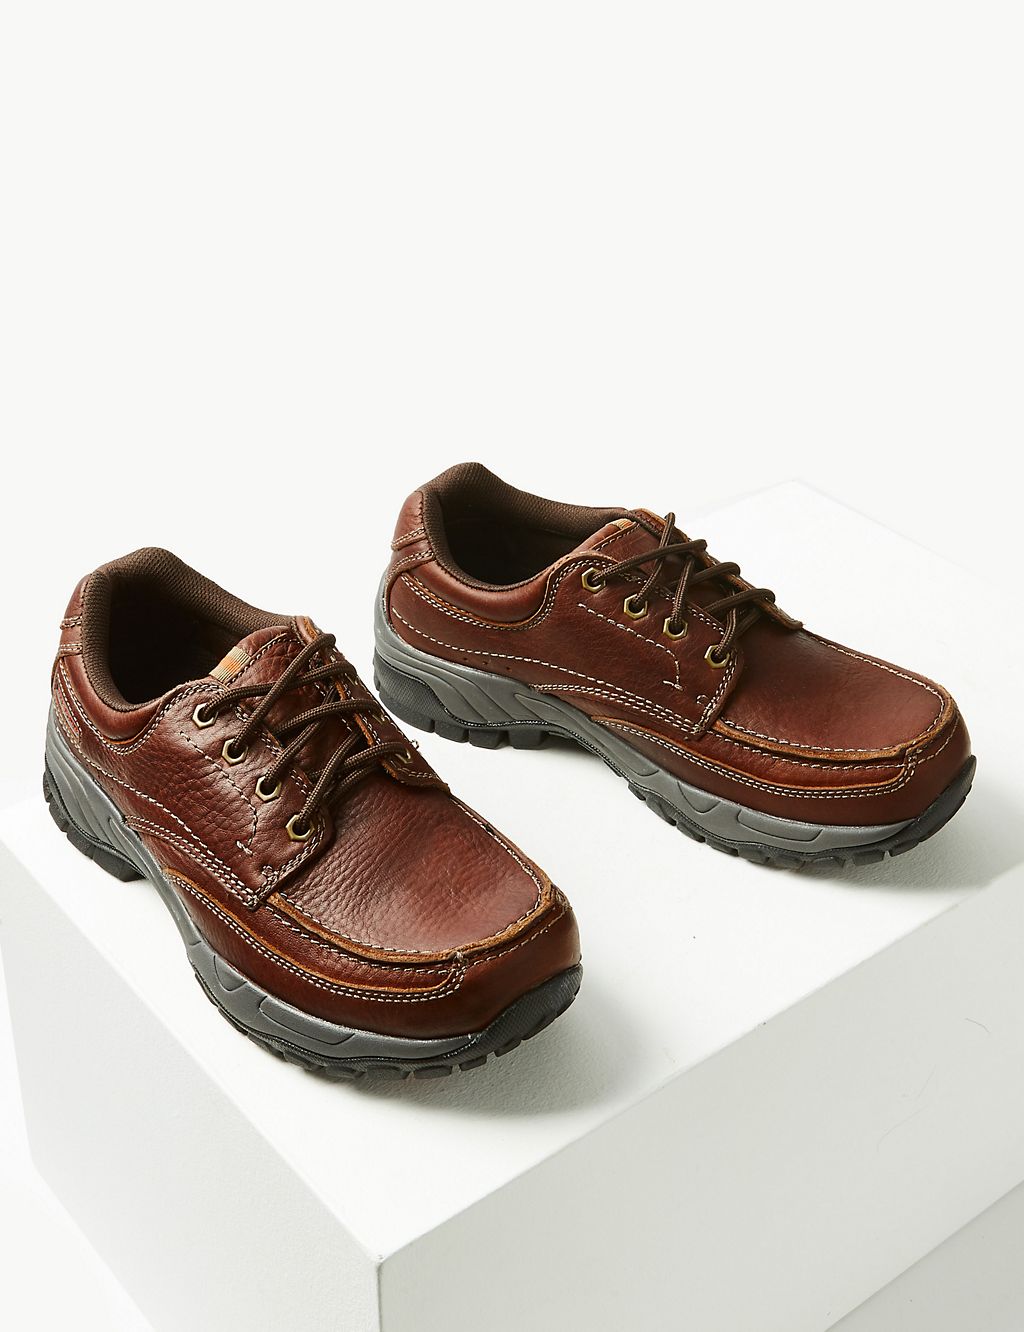 Leather Waterproof Shoes 6 of 7